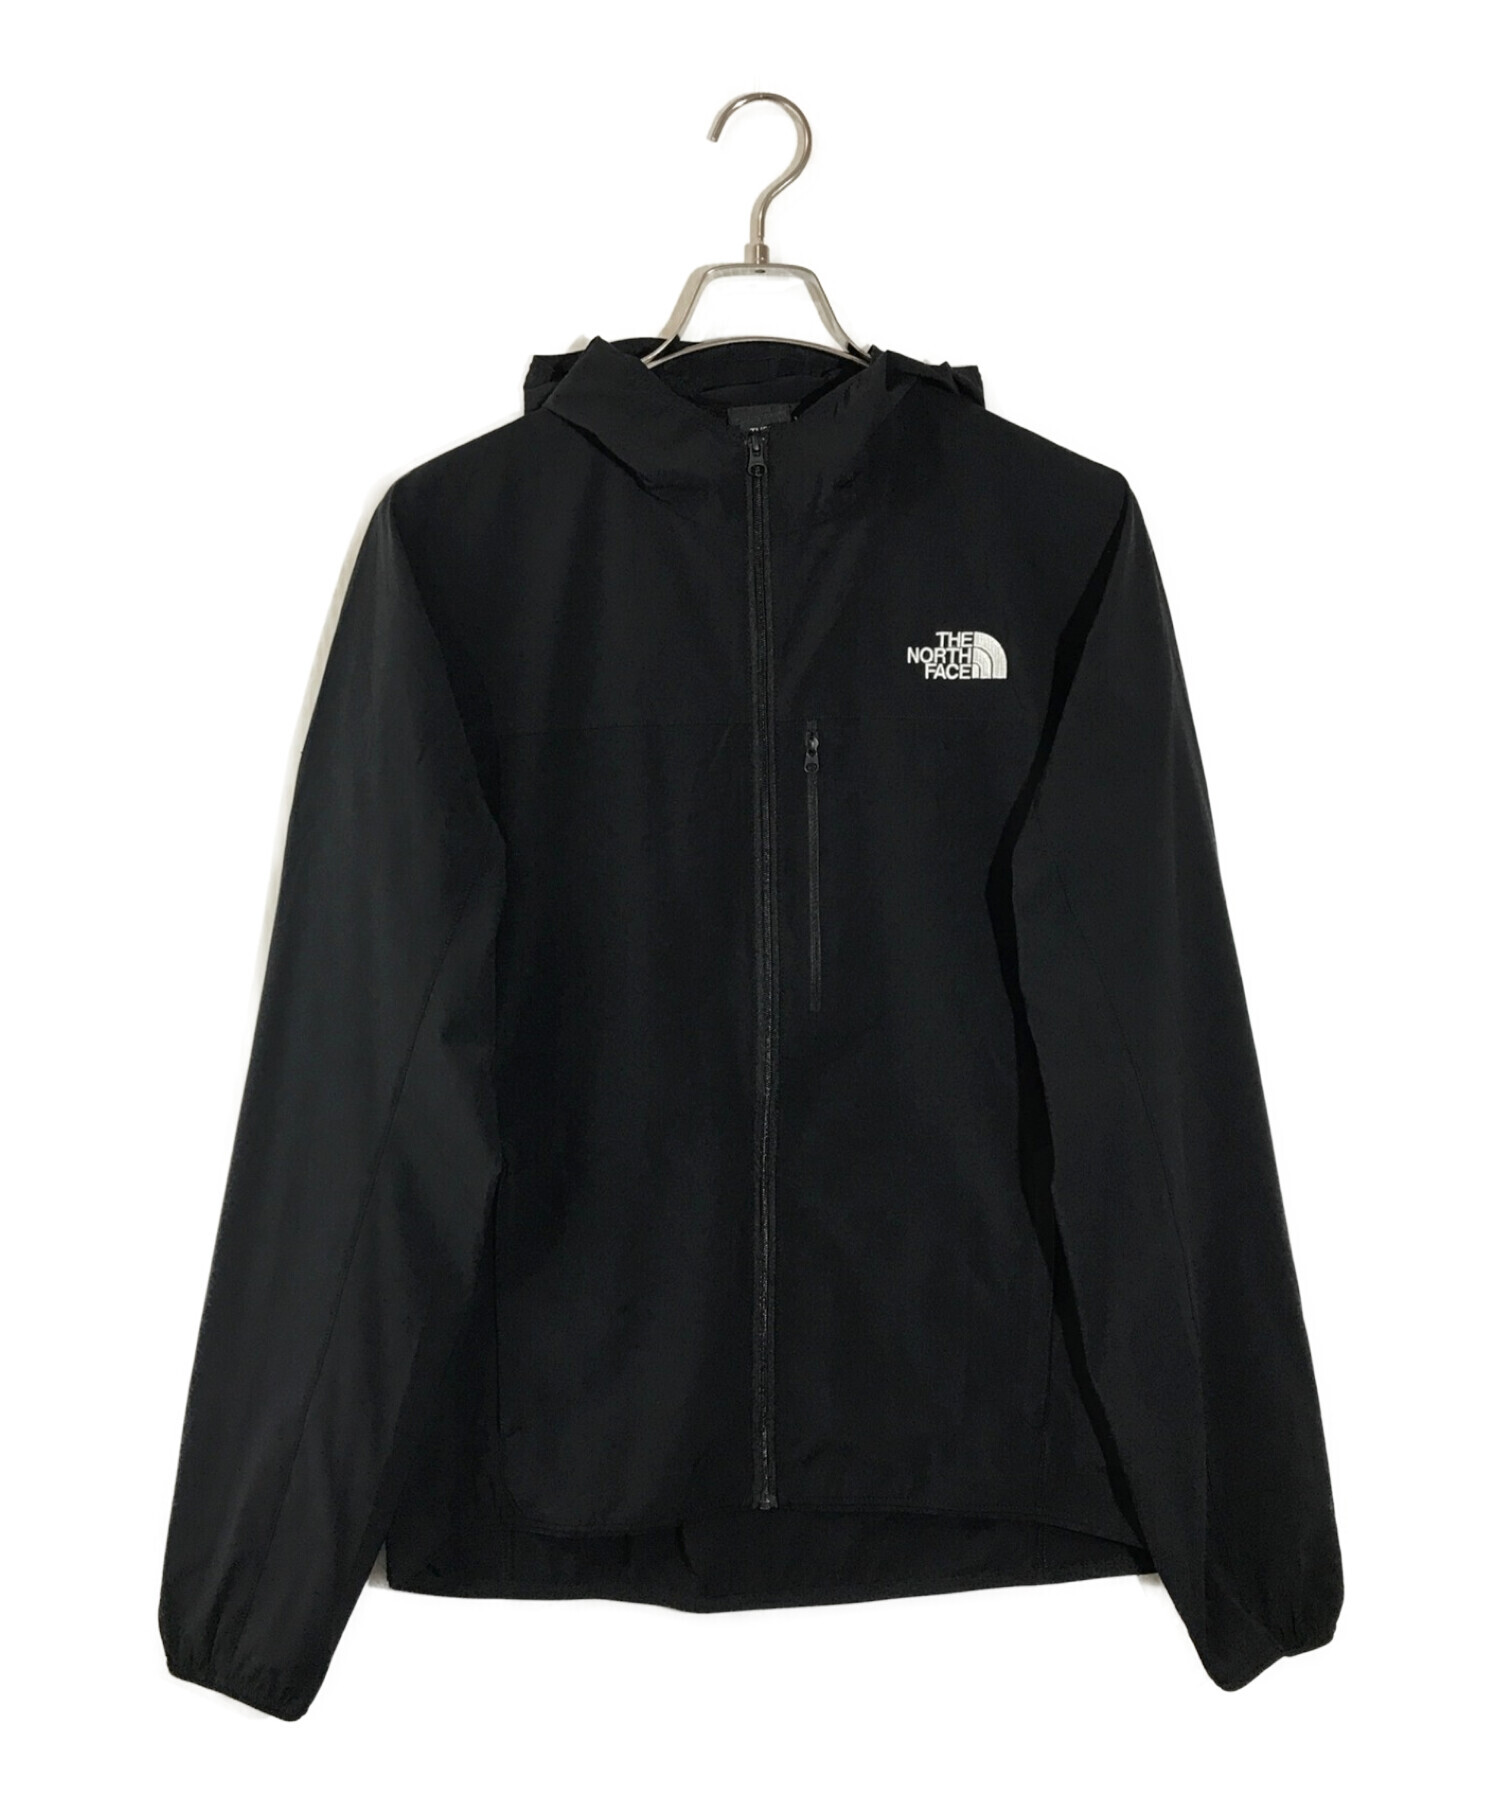 THE NORTH FACE  ナイロンパーカー